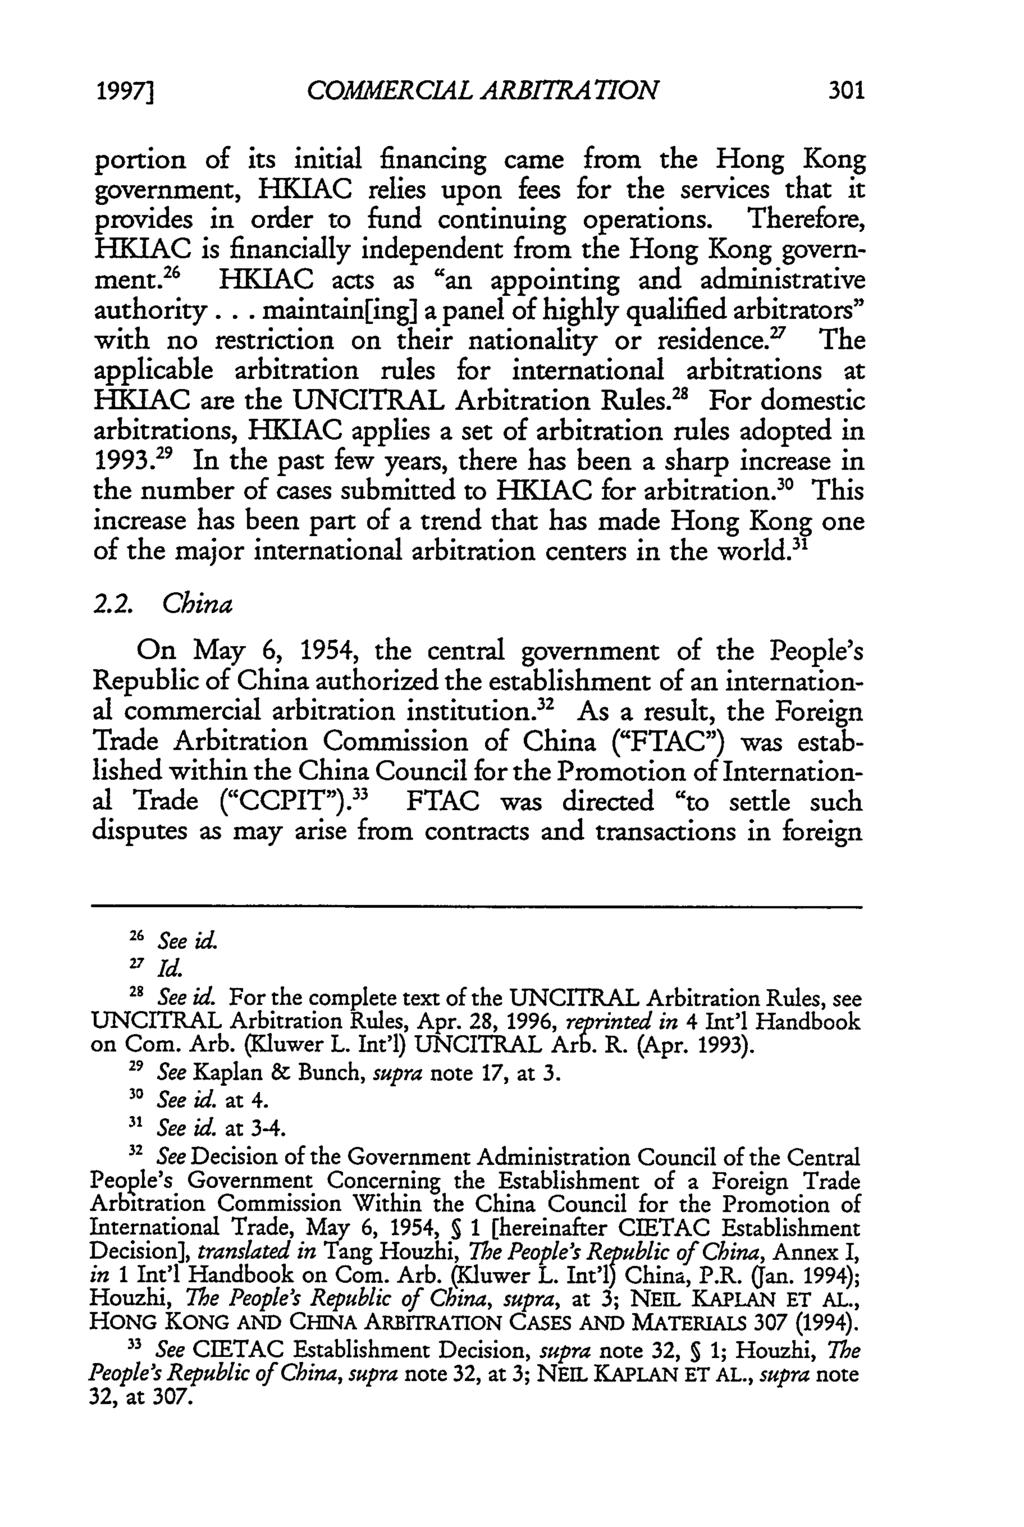 1997] Fishburne and Lian: Commercial Arbitration in Hong Kong and China: A Comparative Anal COMMERCIAL ARBITRATION portion of its initial financing came from the Hong Kong government, HKIAC relies